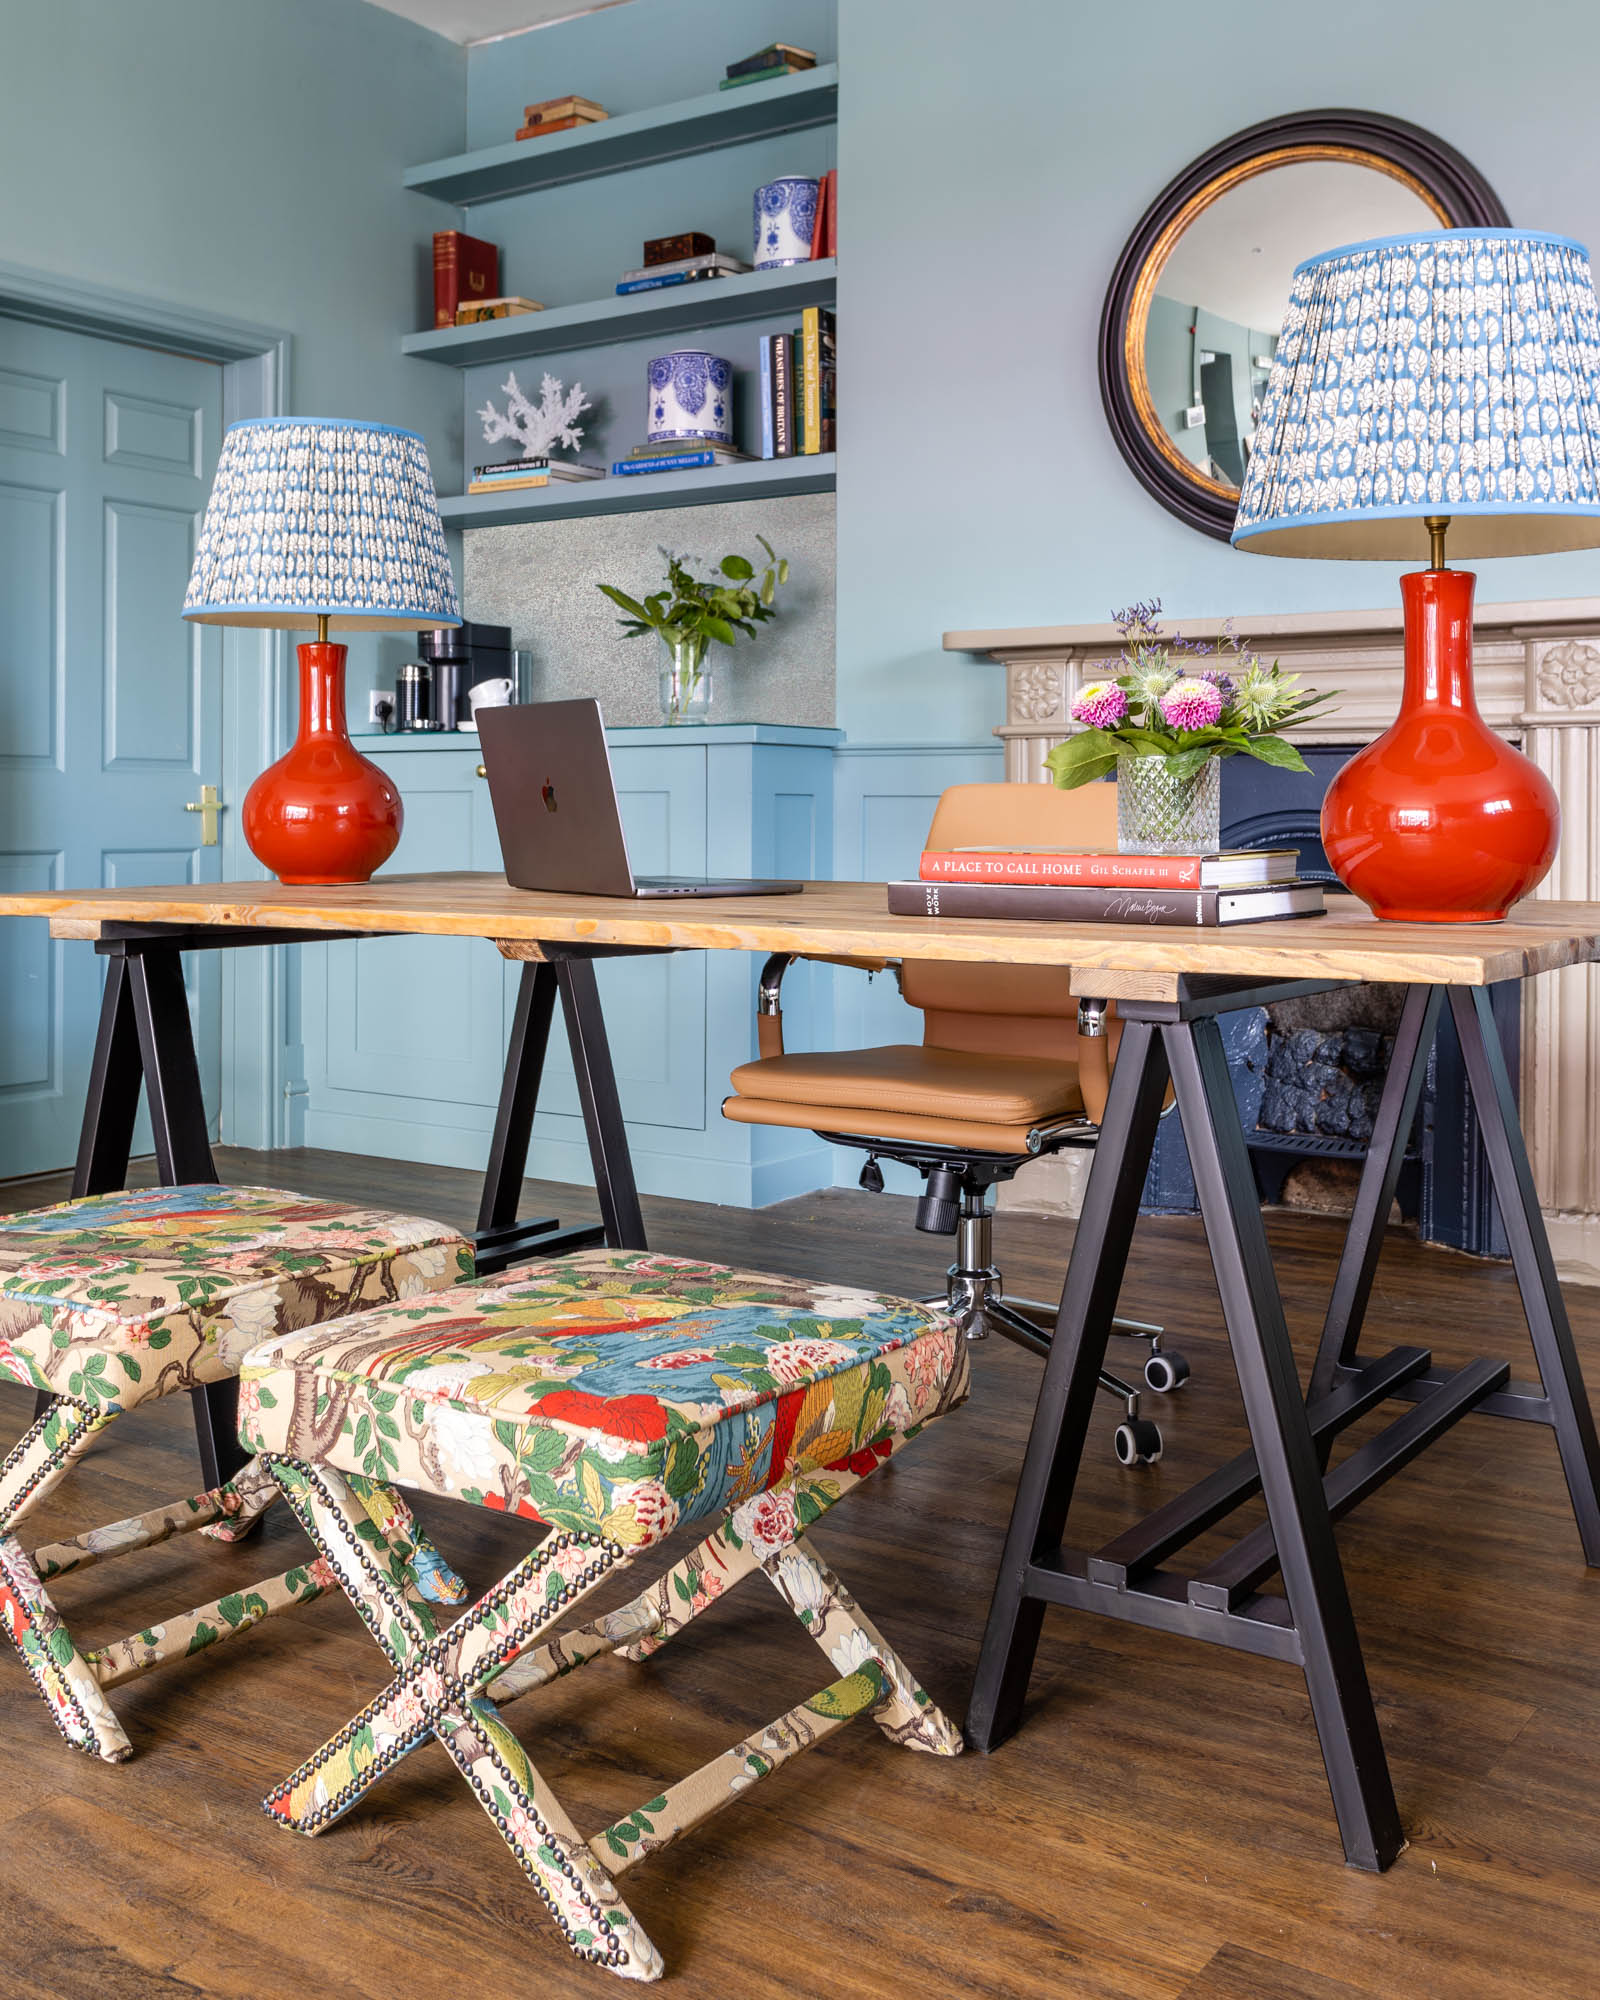 A straight on shot of the desk area in a boutique real estate agency. A trestle desk sits at the centre, with red Pooky lamps on either side, and GP & J Baker’s Rockbird Signature botanical print on the x-frame stools below. The walls are painted in Farrow & Ball’s Oval Room Blue, and behind the desk is featured a round convex mirror. To the left is a coffee station with shelving above, featuring vintage books, ginger jars and decor items chosen by the client.